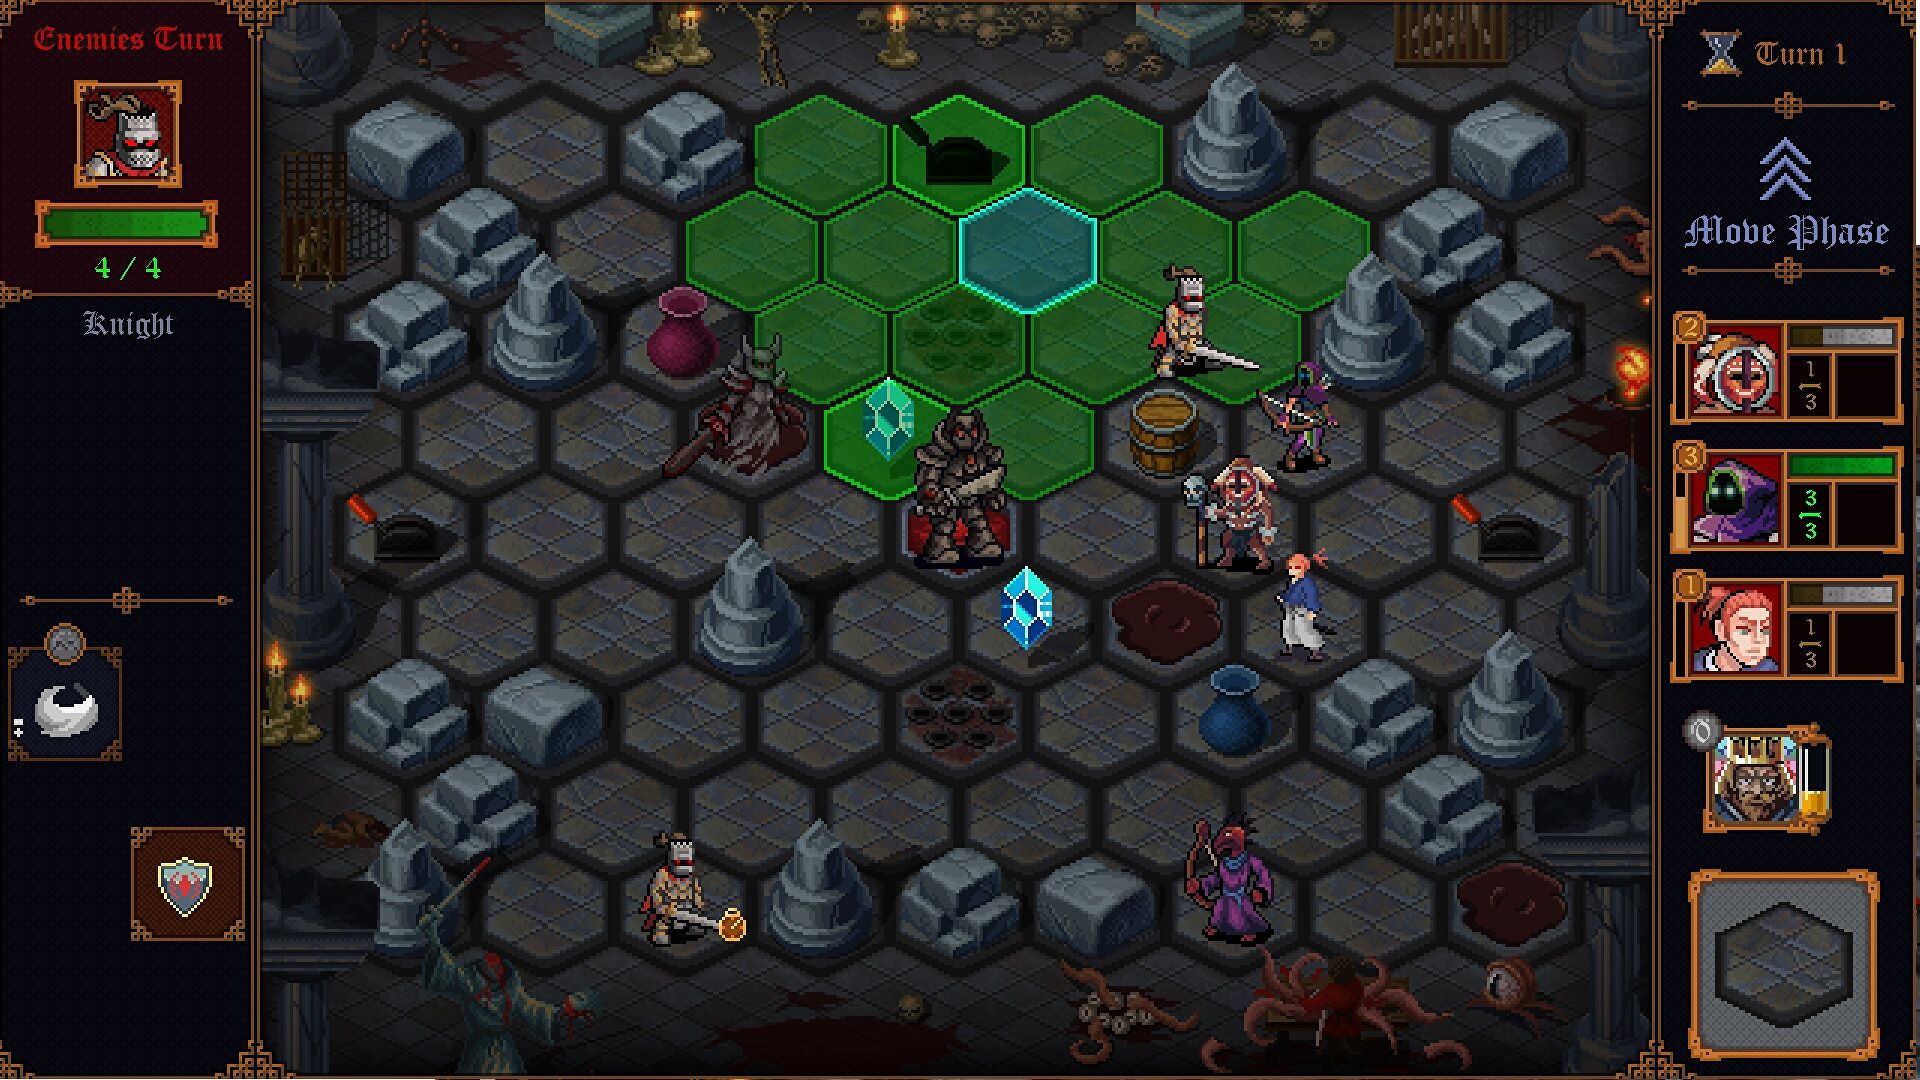 Immortal Tactics is perfect for chunky lunchbreak hexfighting